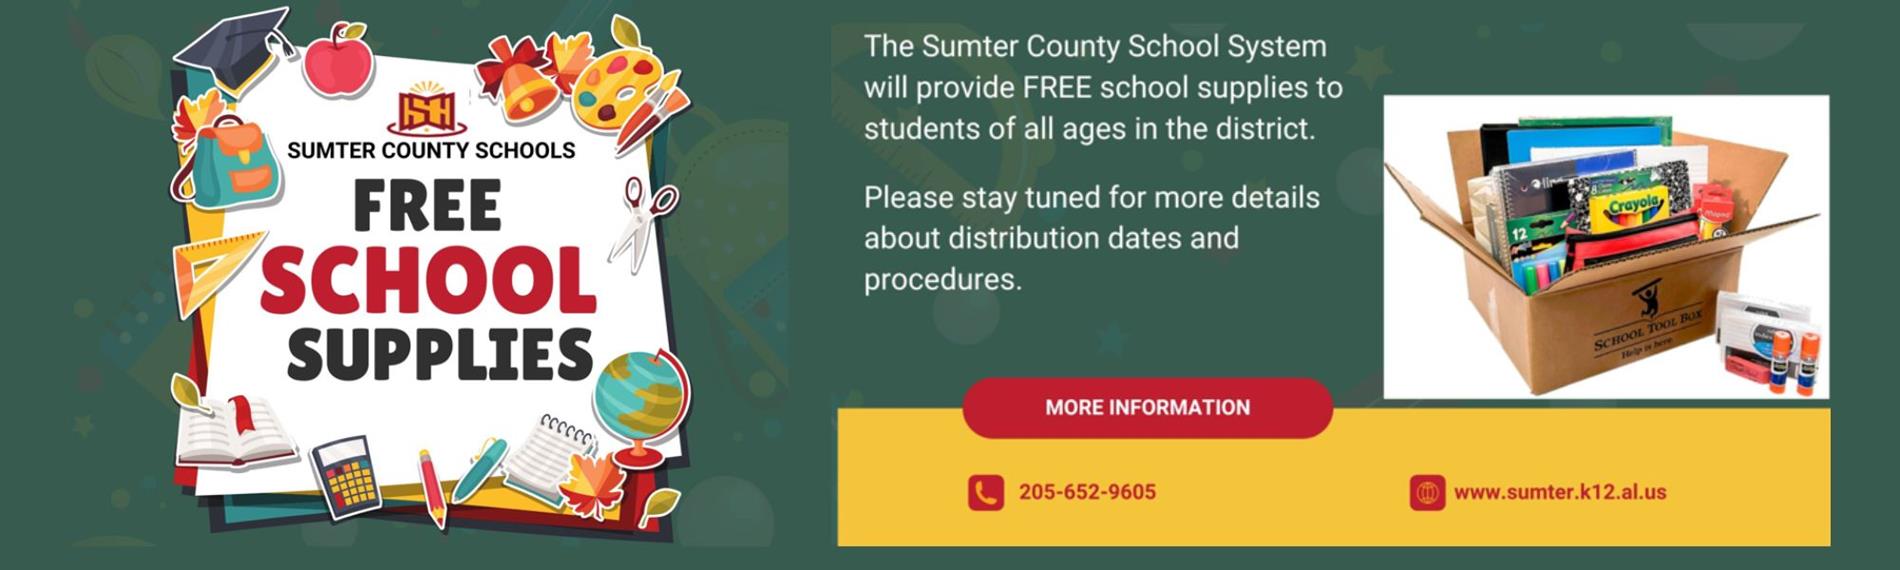 SCS - Free School Supplies - SCS will provide Free school supplies to students of all ages in the district. Stay tuned for more details on distribution dates and procedures. More info call 205-652-9605 